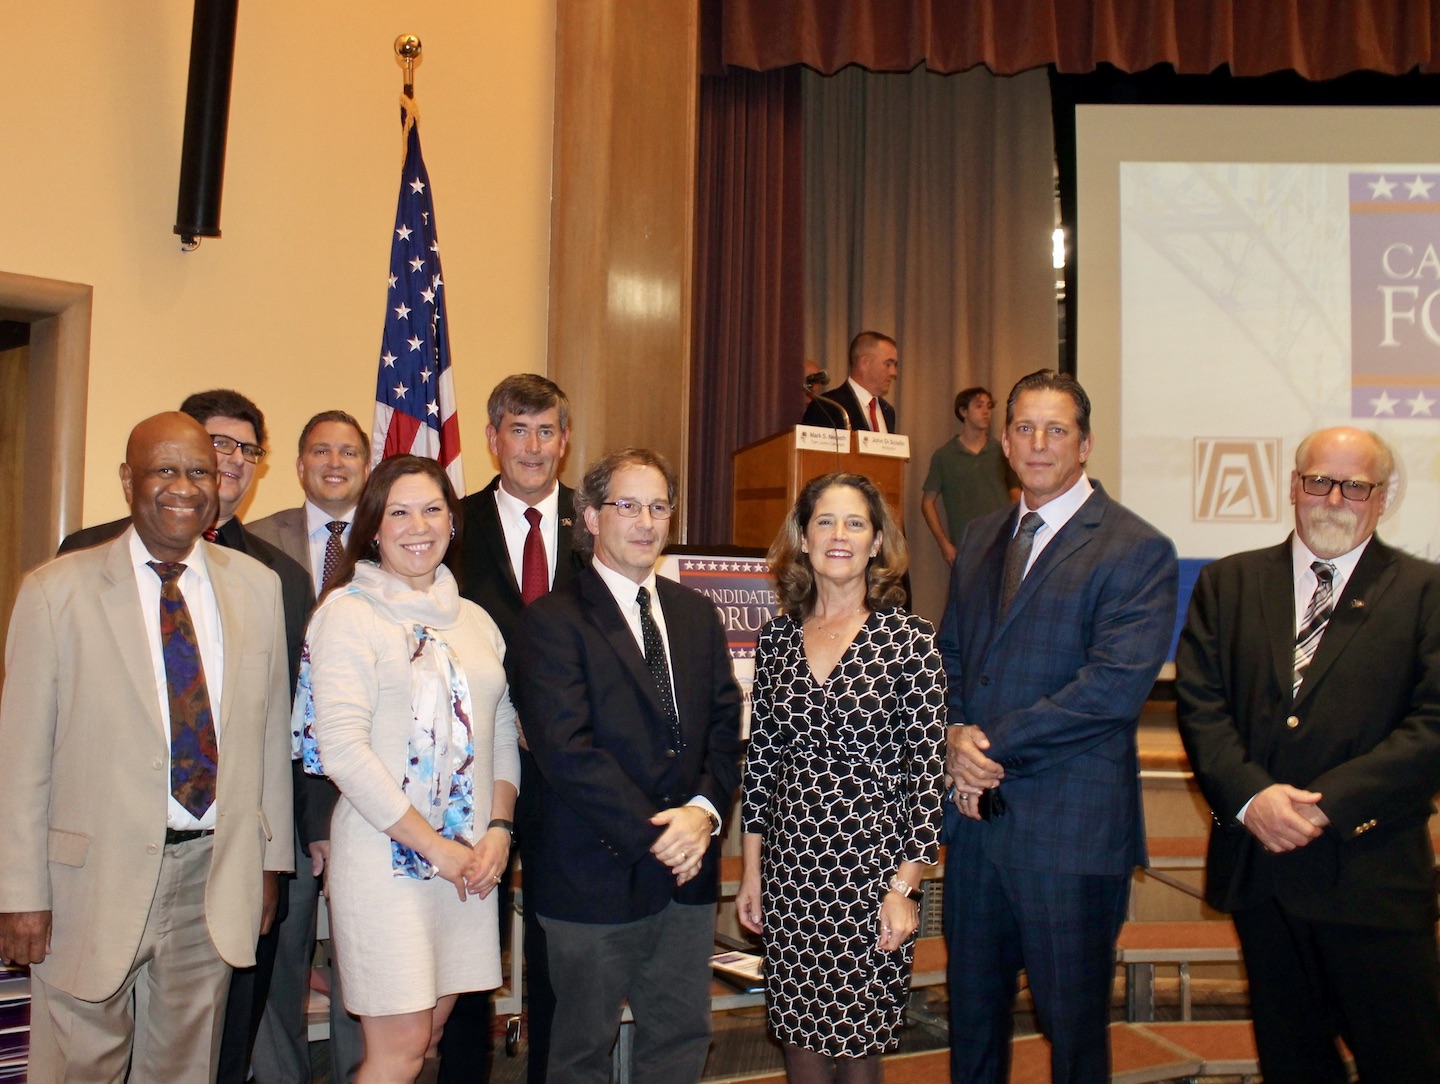 Town political candidates pose before a forum held Tuesday night at Kaegebein Elementary School. From left: Wayne West, Town Board candidate; George Hauss, town clerk candidate; Tom Digati, incumbent Town Board candidate; Kristen Obarka, Town Board candidate; Mike Madigan, supervisor candidate; Mark Nemeth, incumbent town justice candidate; Patricia Frentzel, incumbent town clerk candidate; Dan Kilmer, Town Board candidate; and Pete Marston, supervisor candidate.